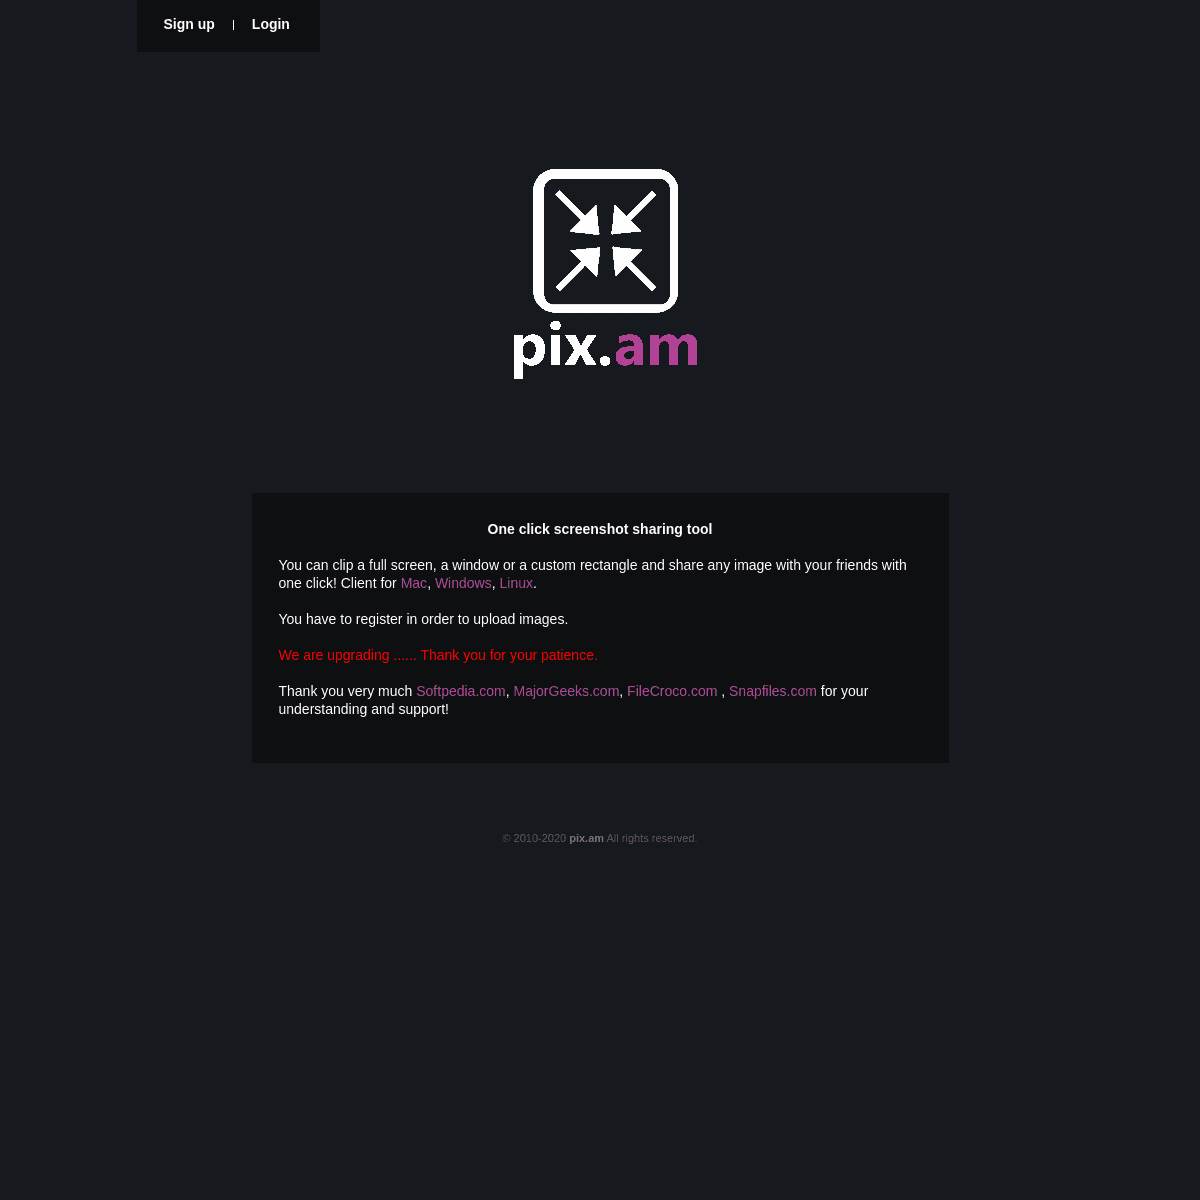 A complete backup of https://pix.am